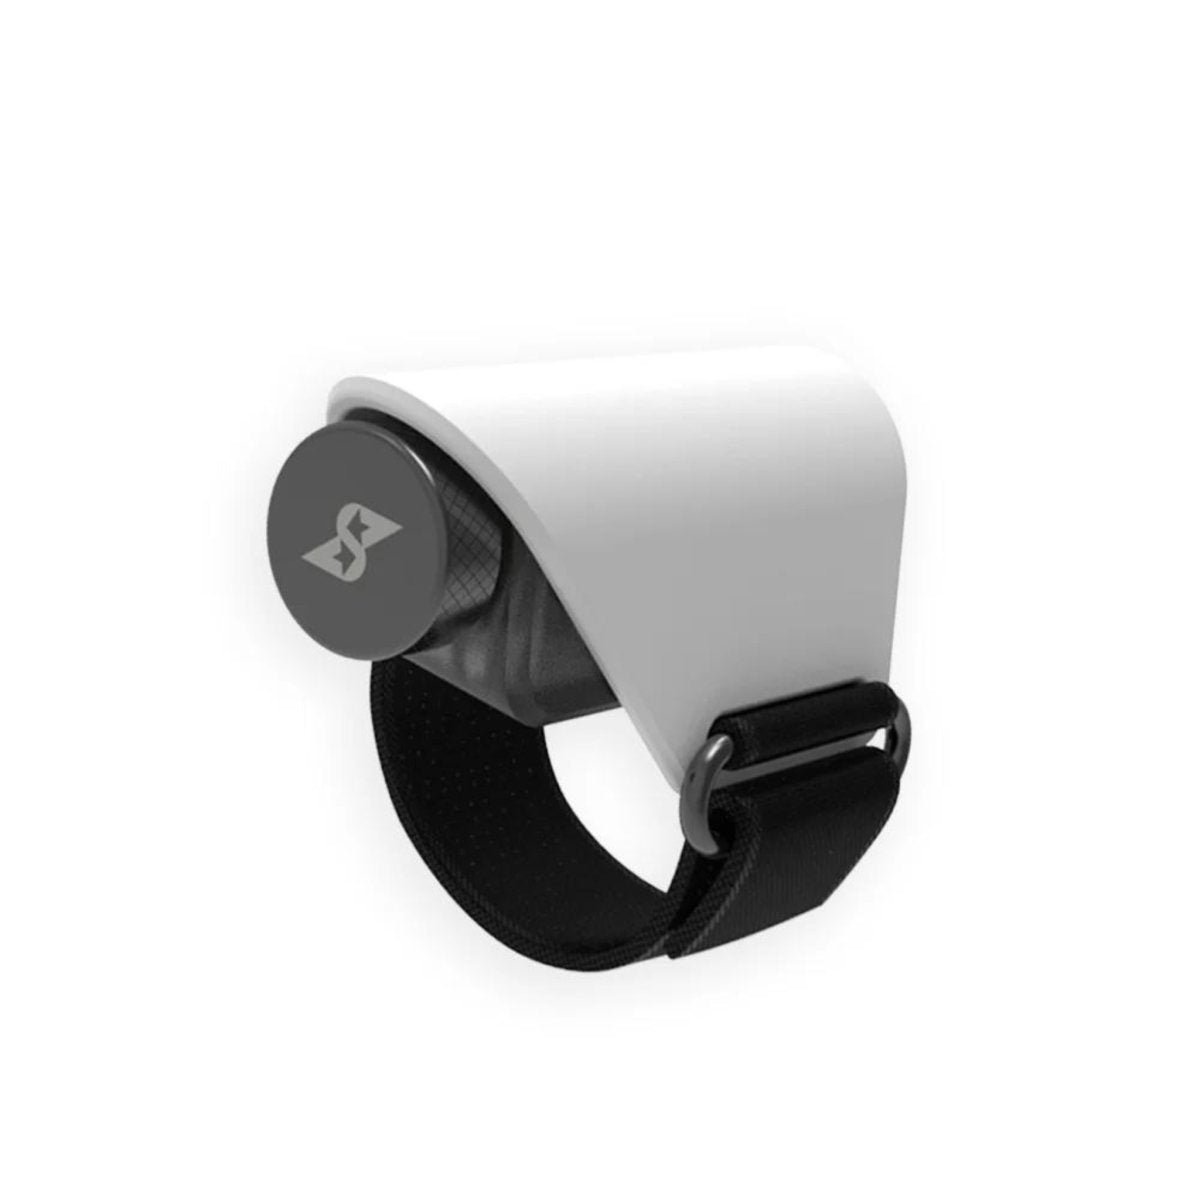 products/smart-bluetooth-ring-controller-748115.jpg